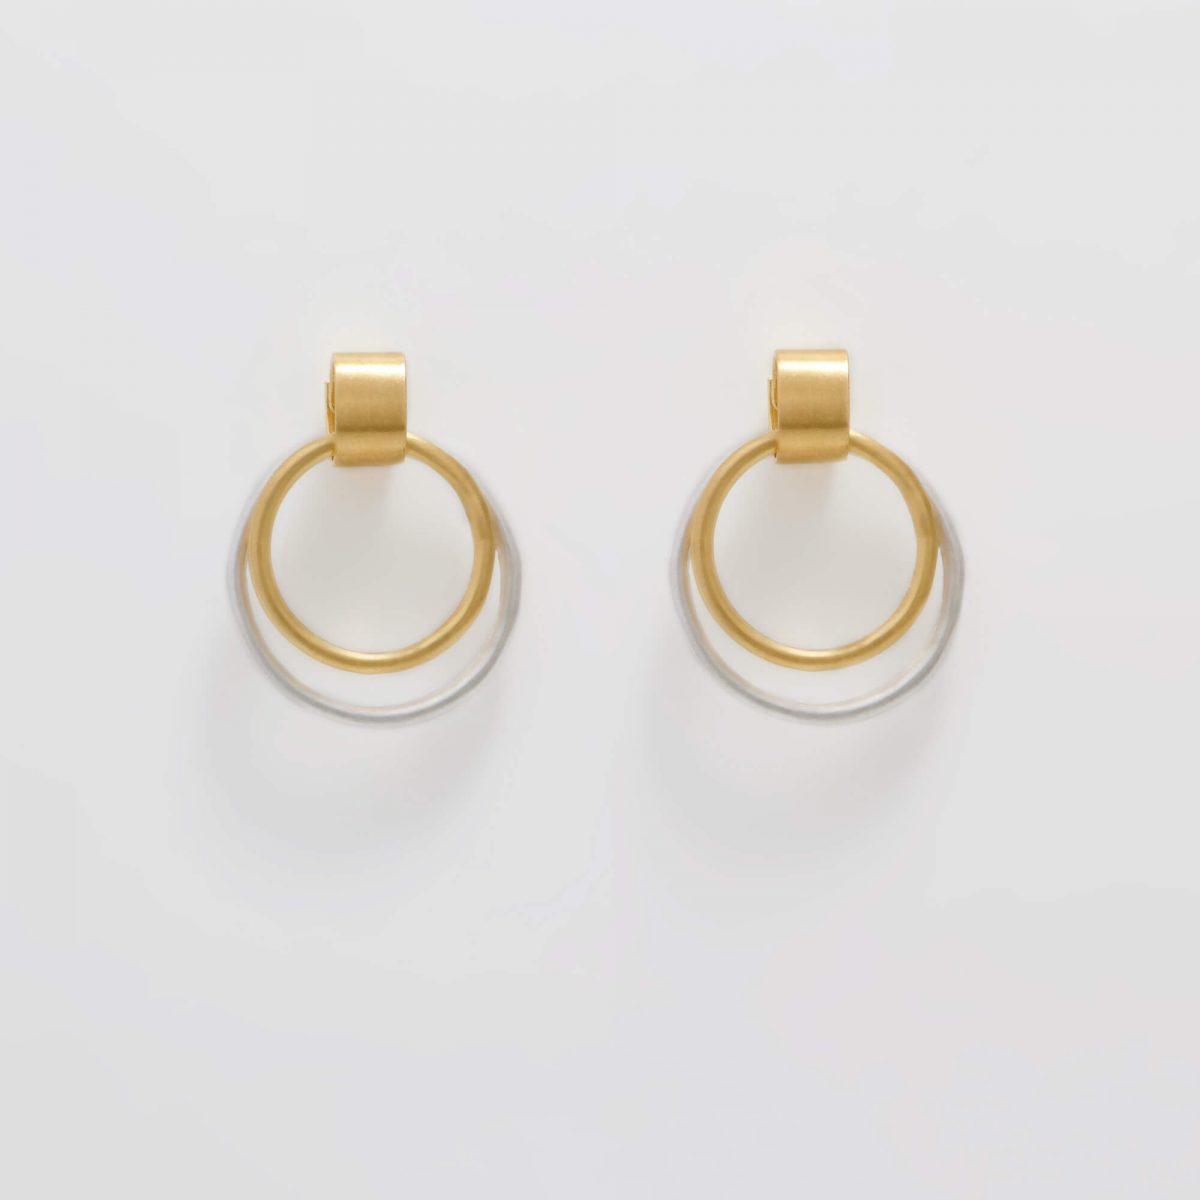 Gold and Silver Cora Earrings by Xoutou's